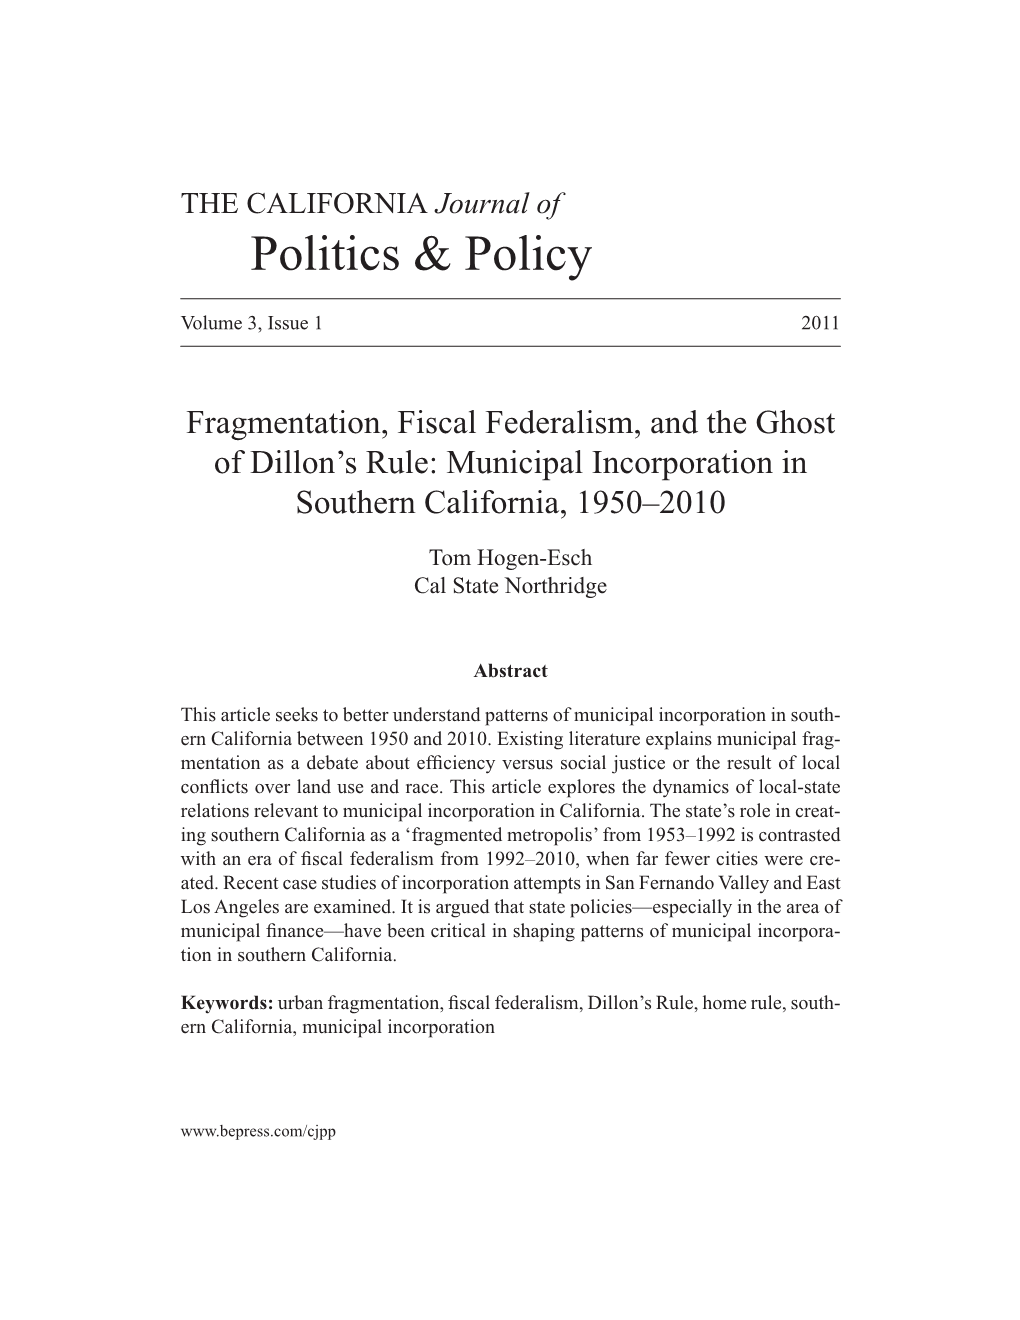 Fragmentation, Fiscal Federalism, and the Ghost of Dillonâ•Žs Rule